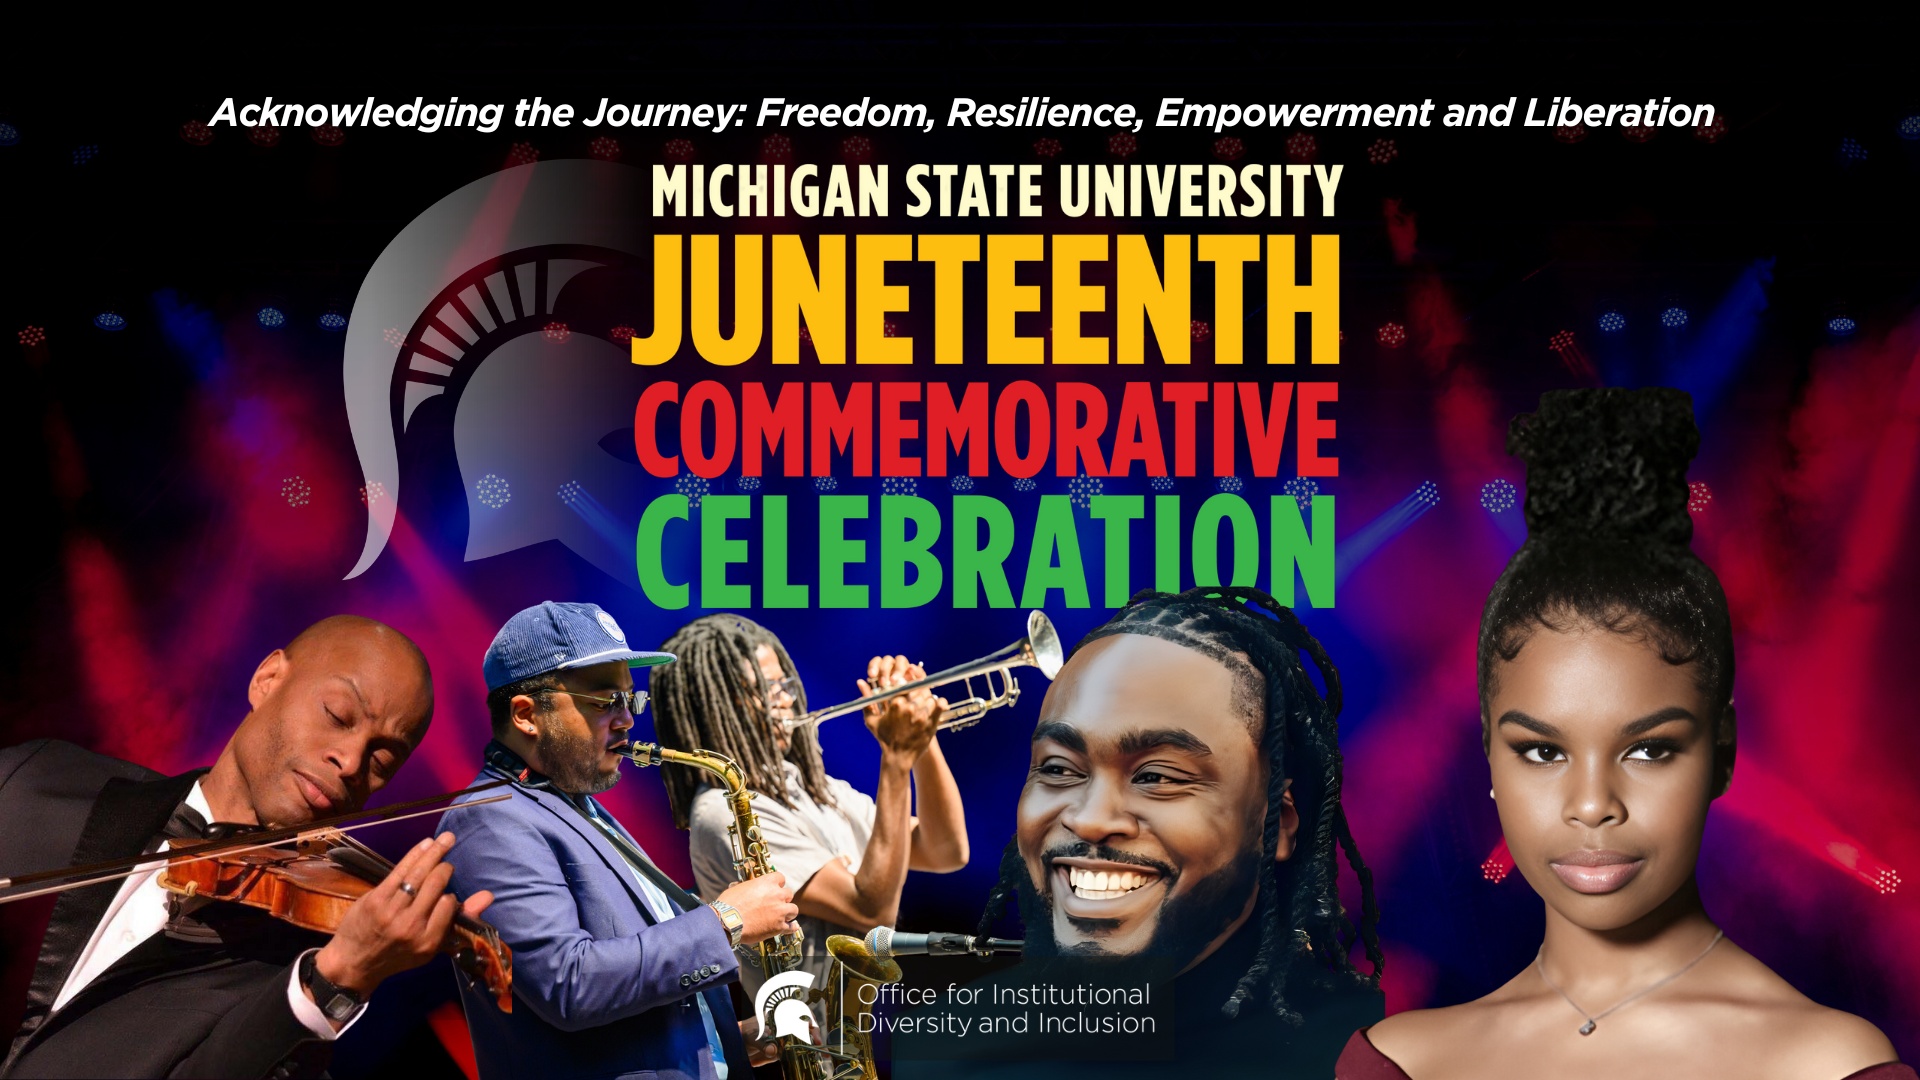 Juneteenth promotional image featuring performers